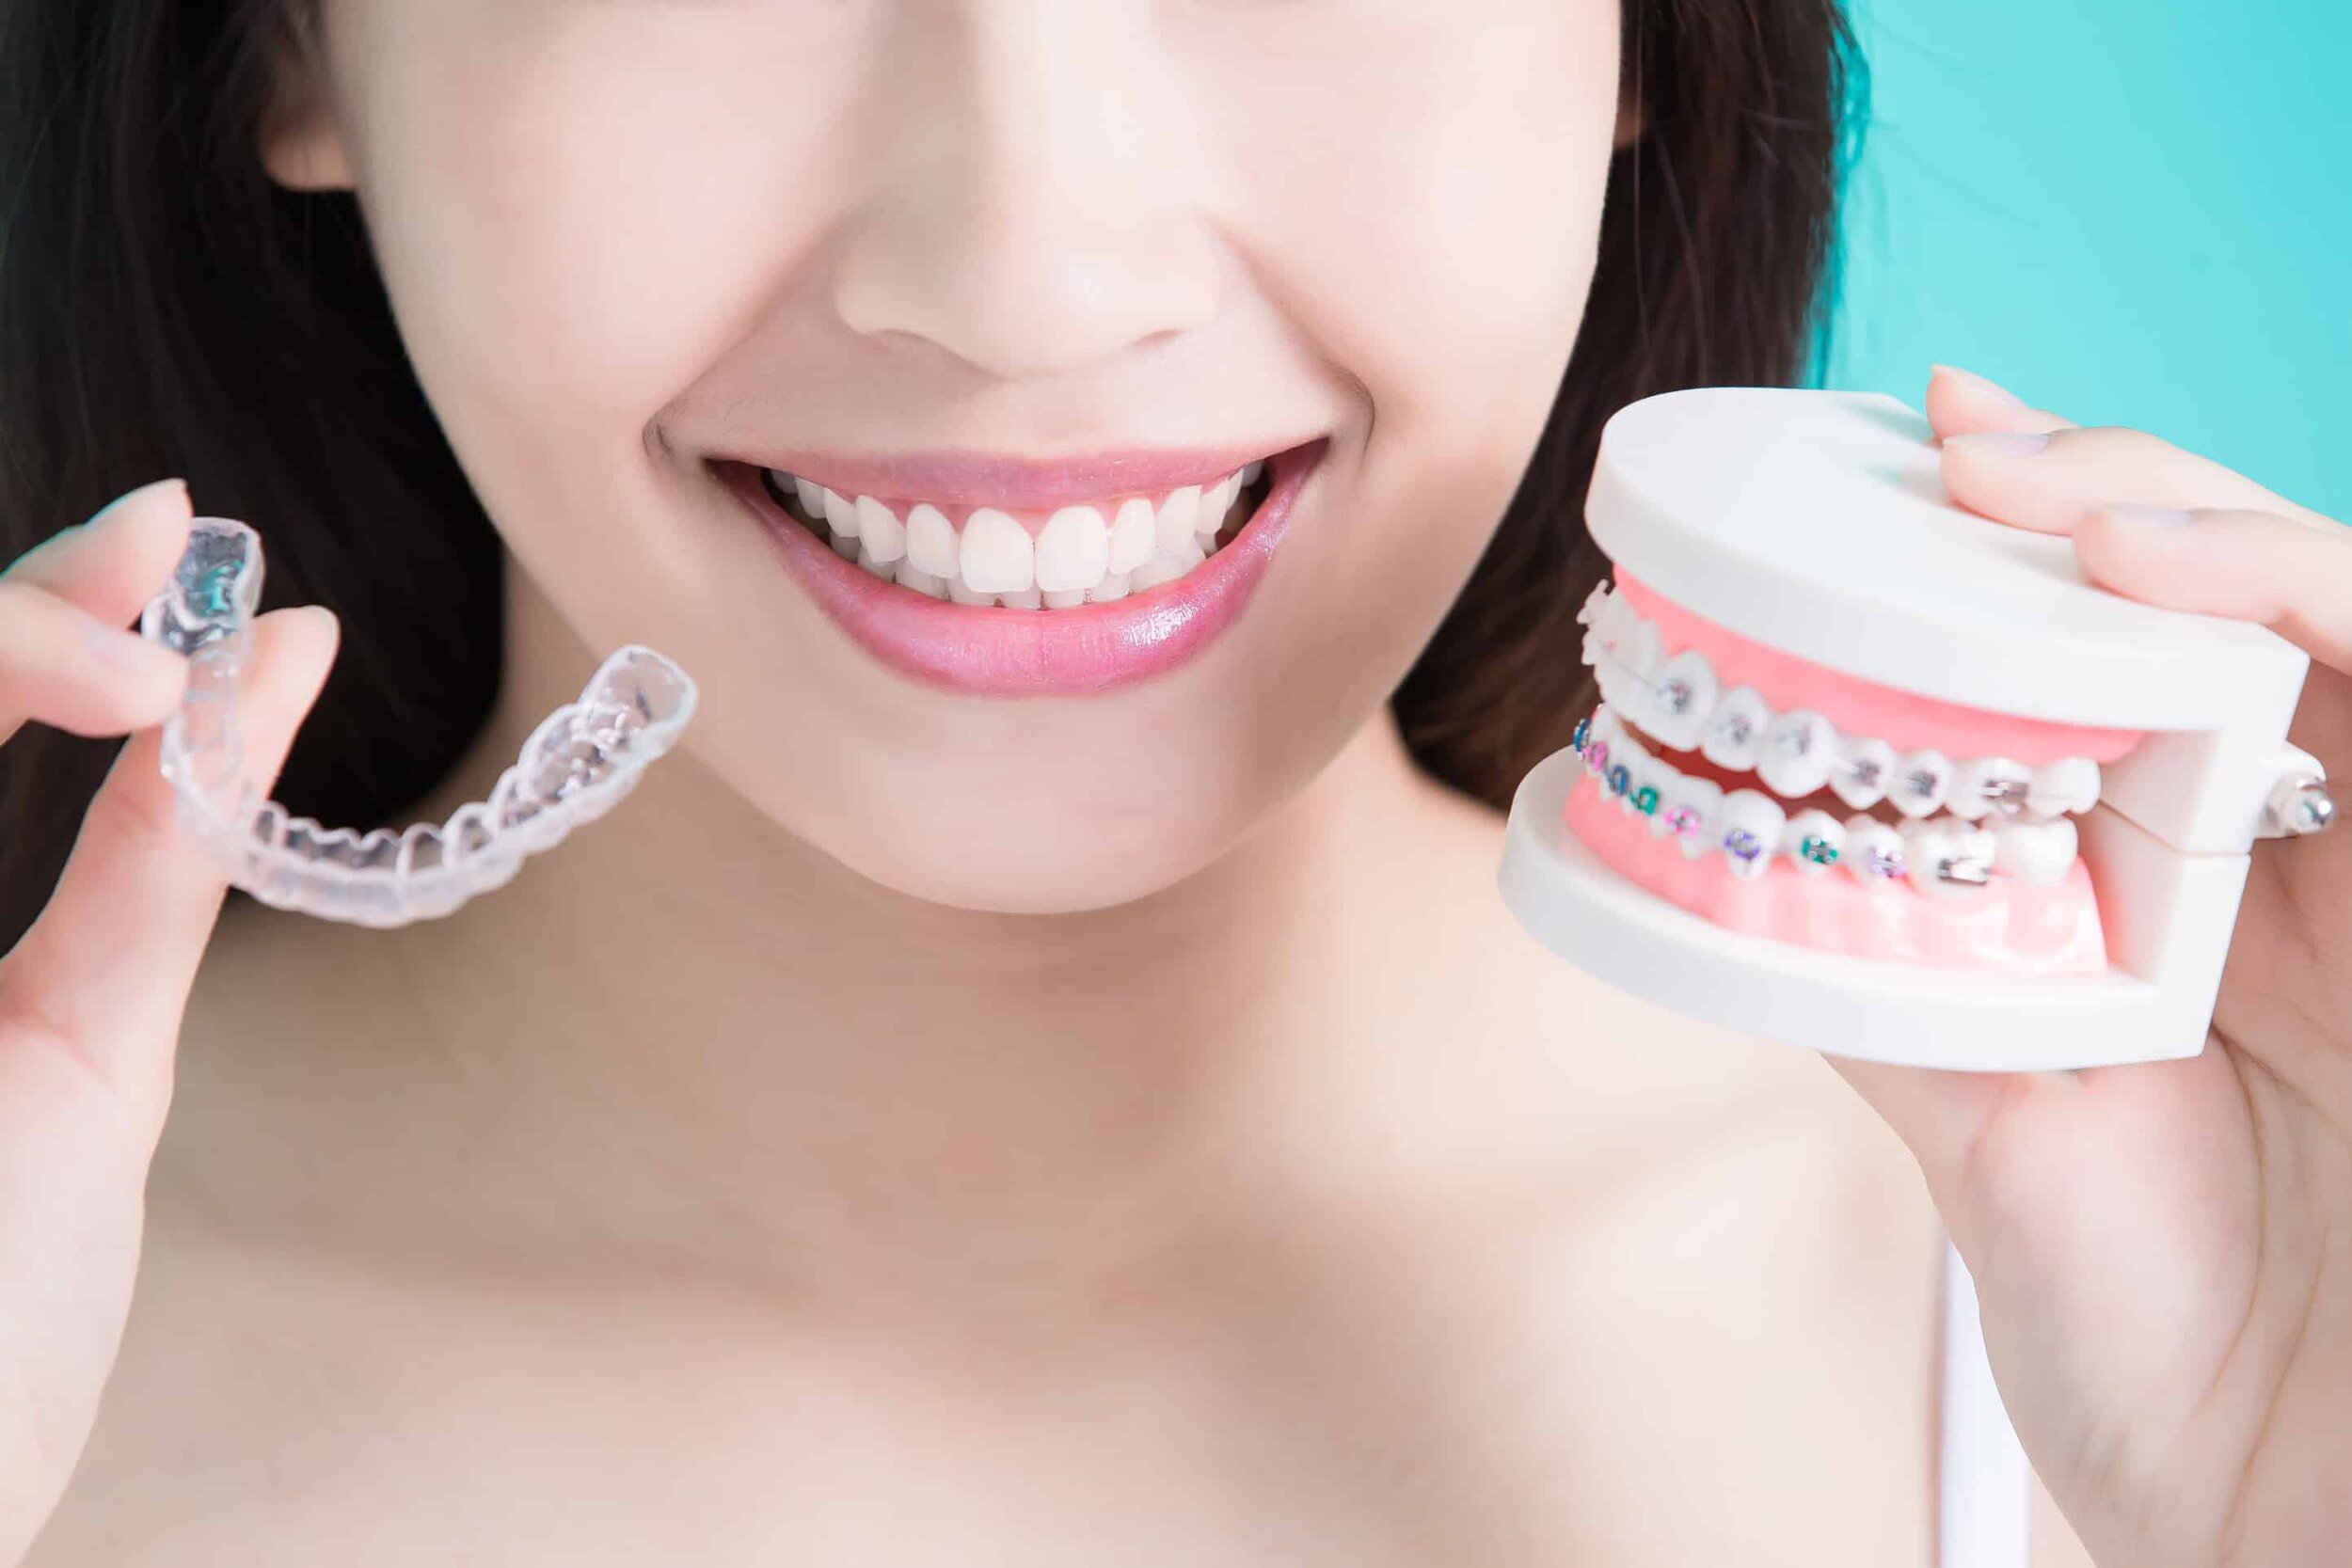 Are you in need of orthodontic treatment & what do you look for in